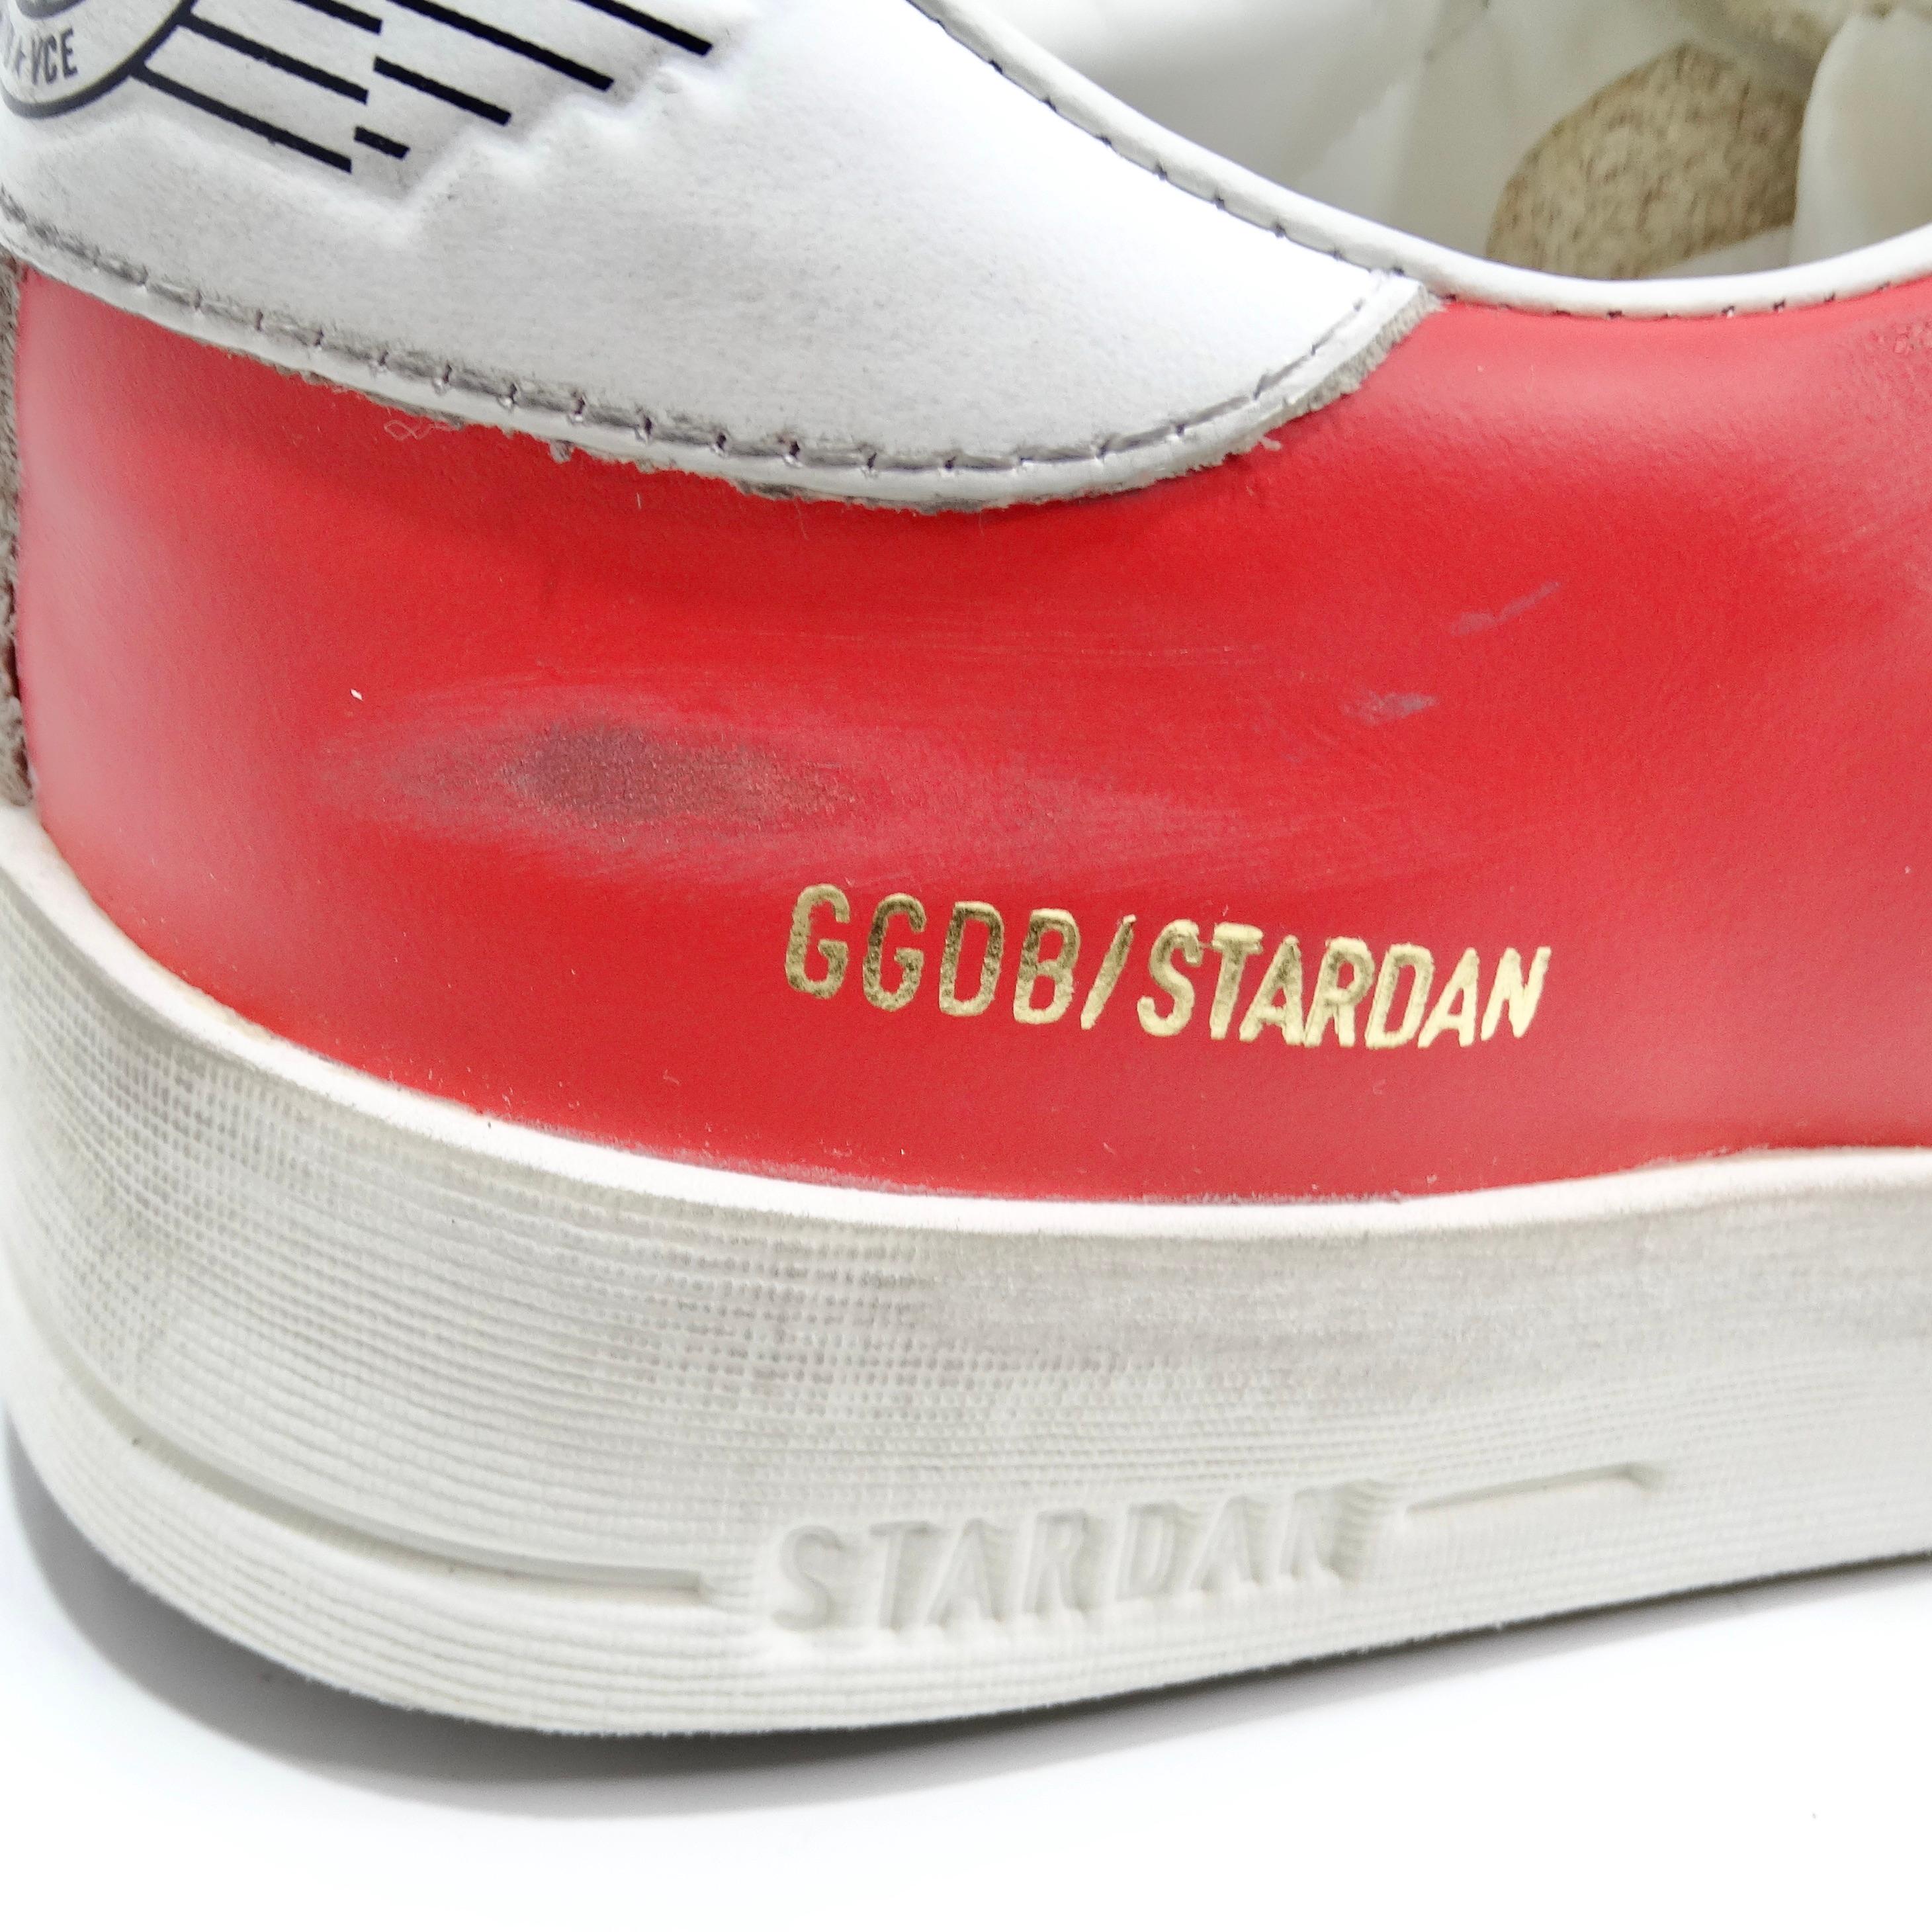 Golden Goose Brand New Stardan Leather Sneakers Red 3